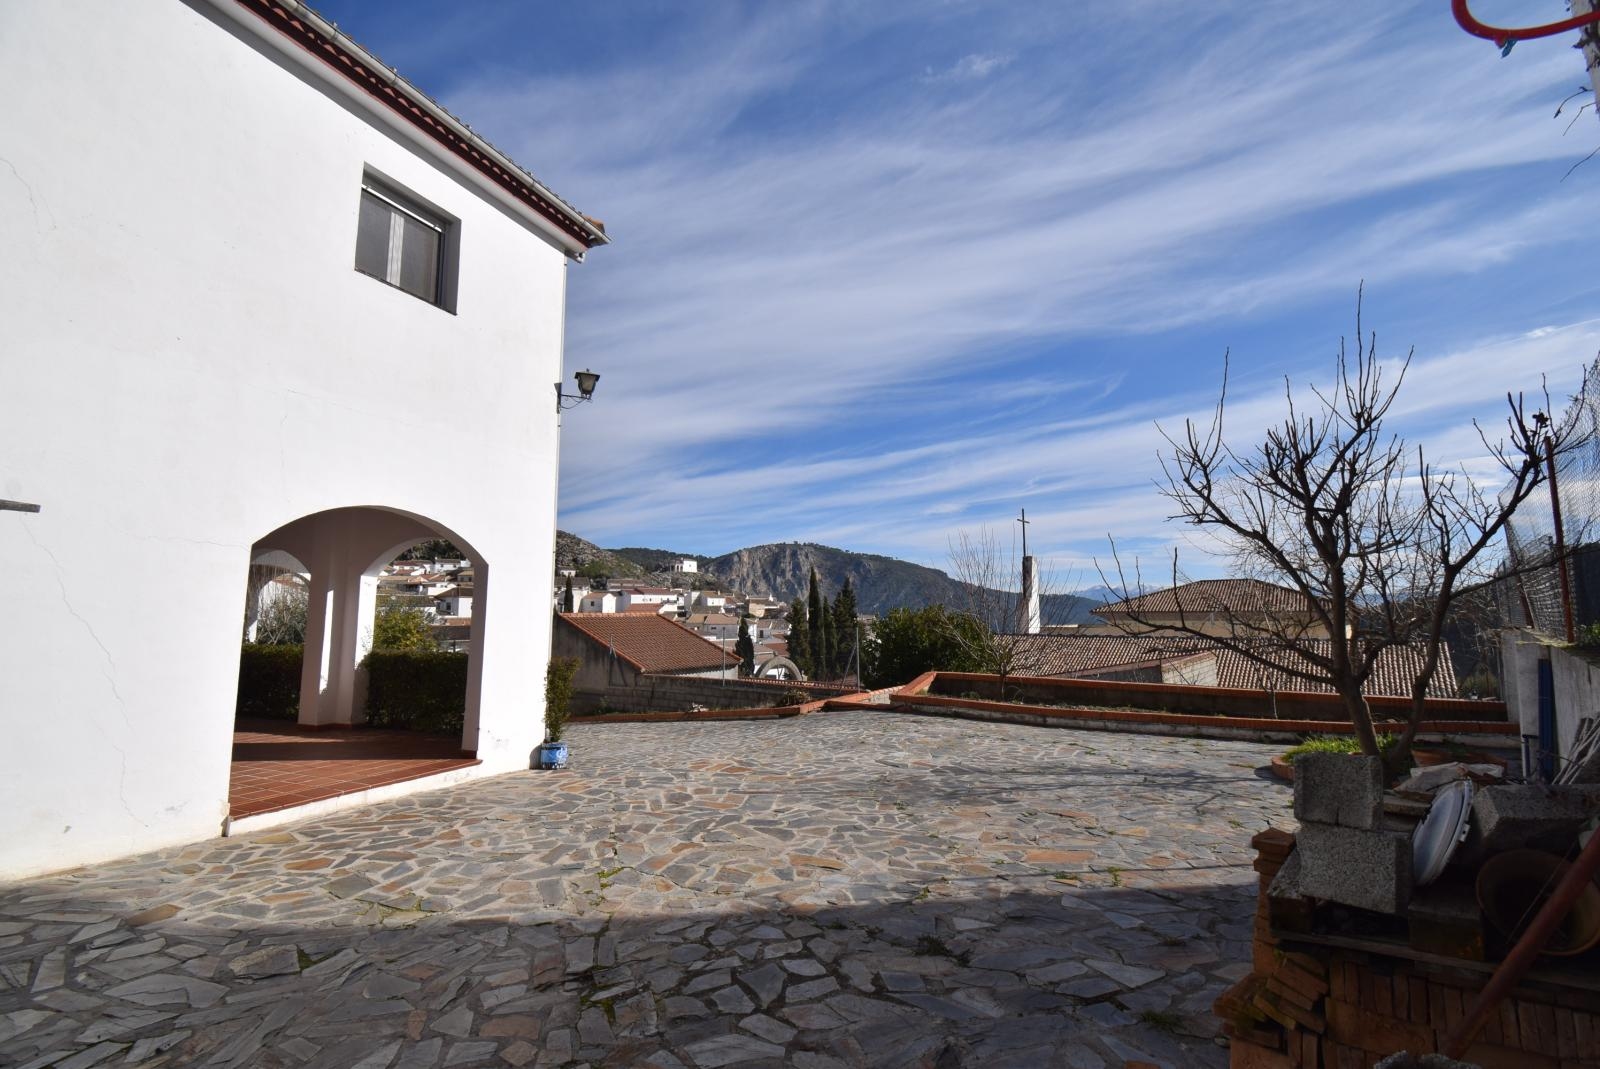 4 BED 2 BATH LOVELY DETACHED VILLA WITH STUNNING VIEWS